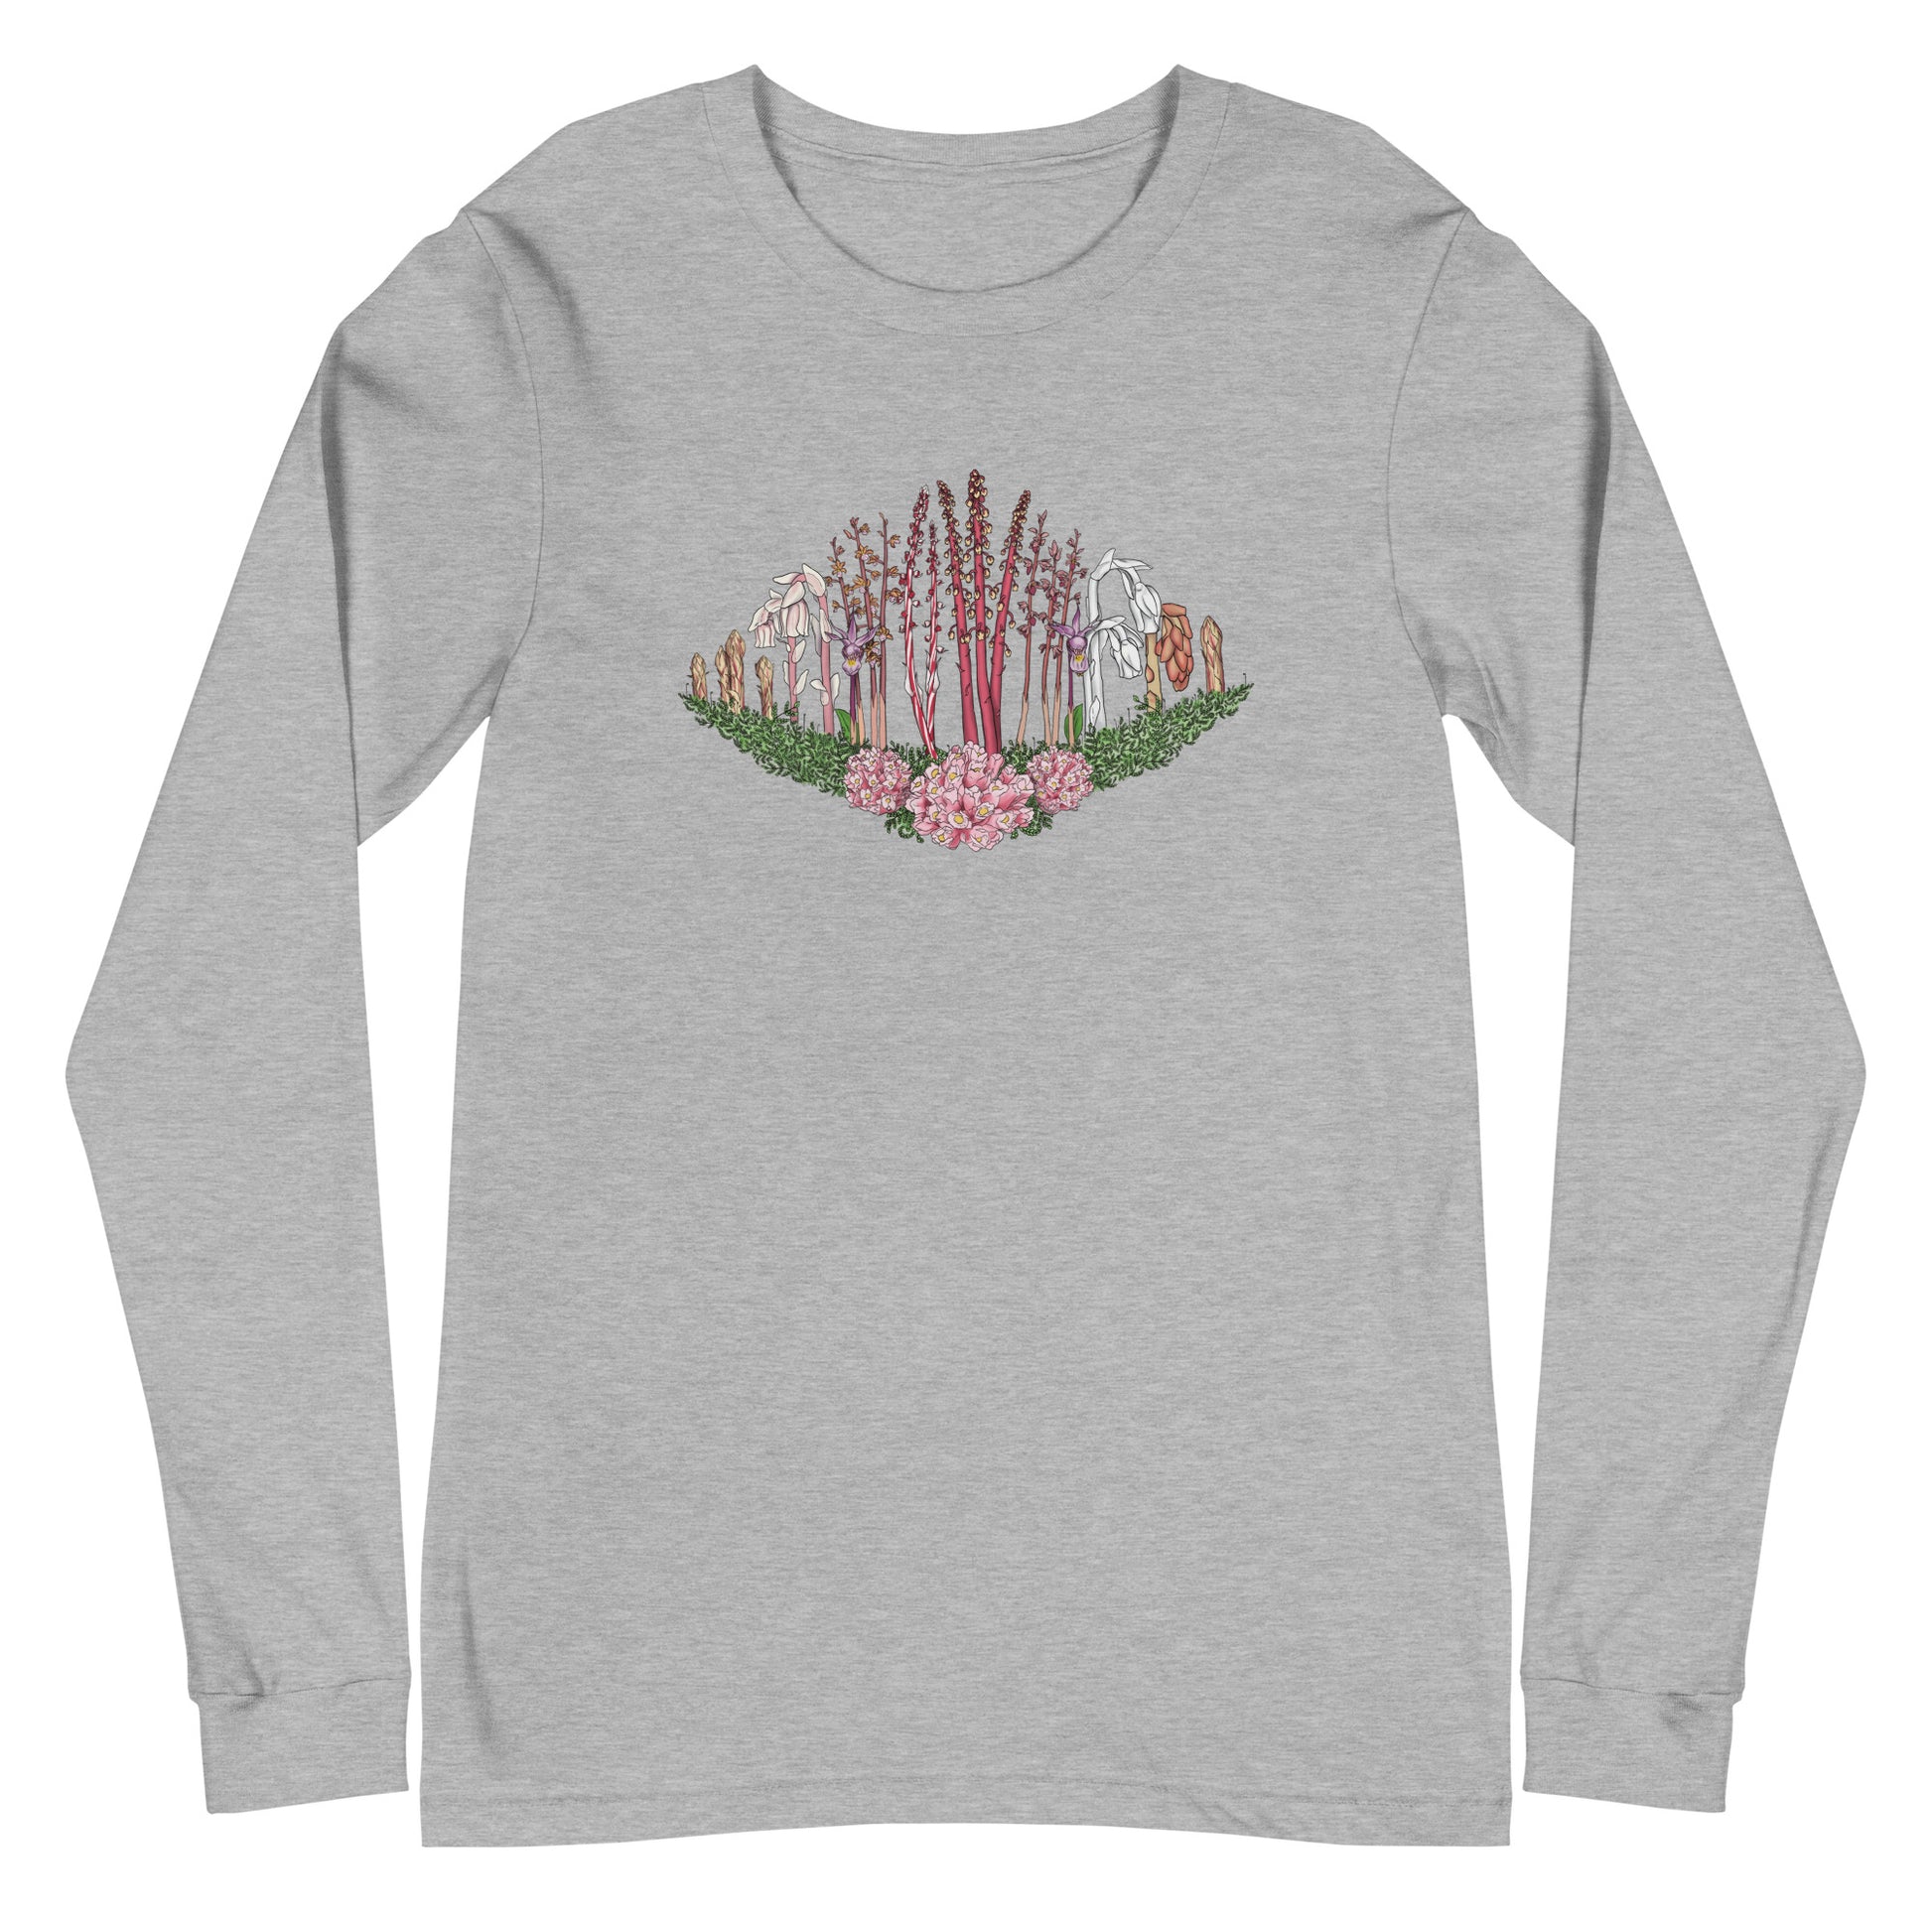 A long-sleeve t-shirt with an image of Ghost pipe, Candystick, pine sap and other micoheterotrophic plants of the PNW.